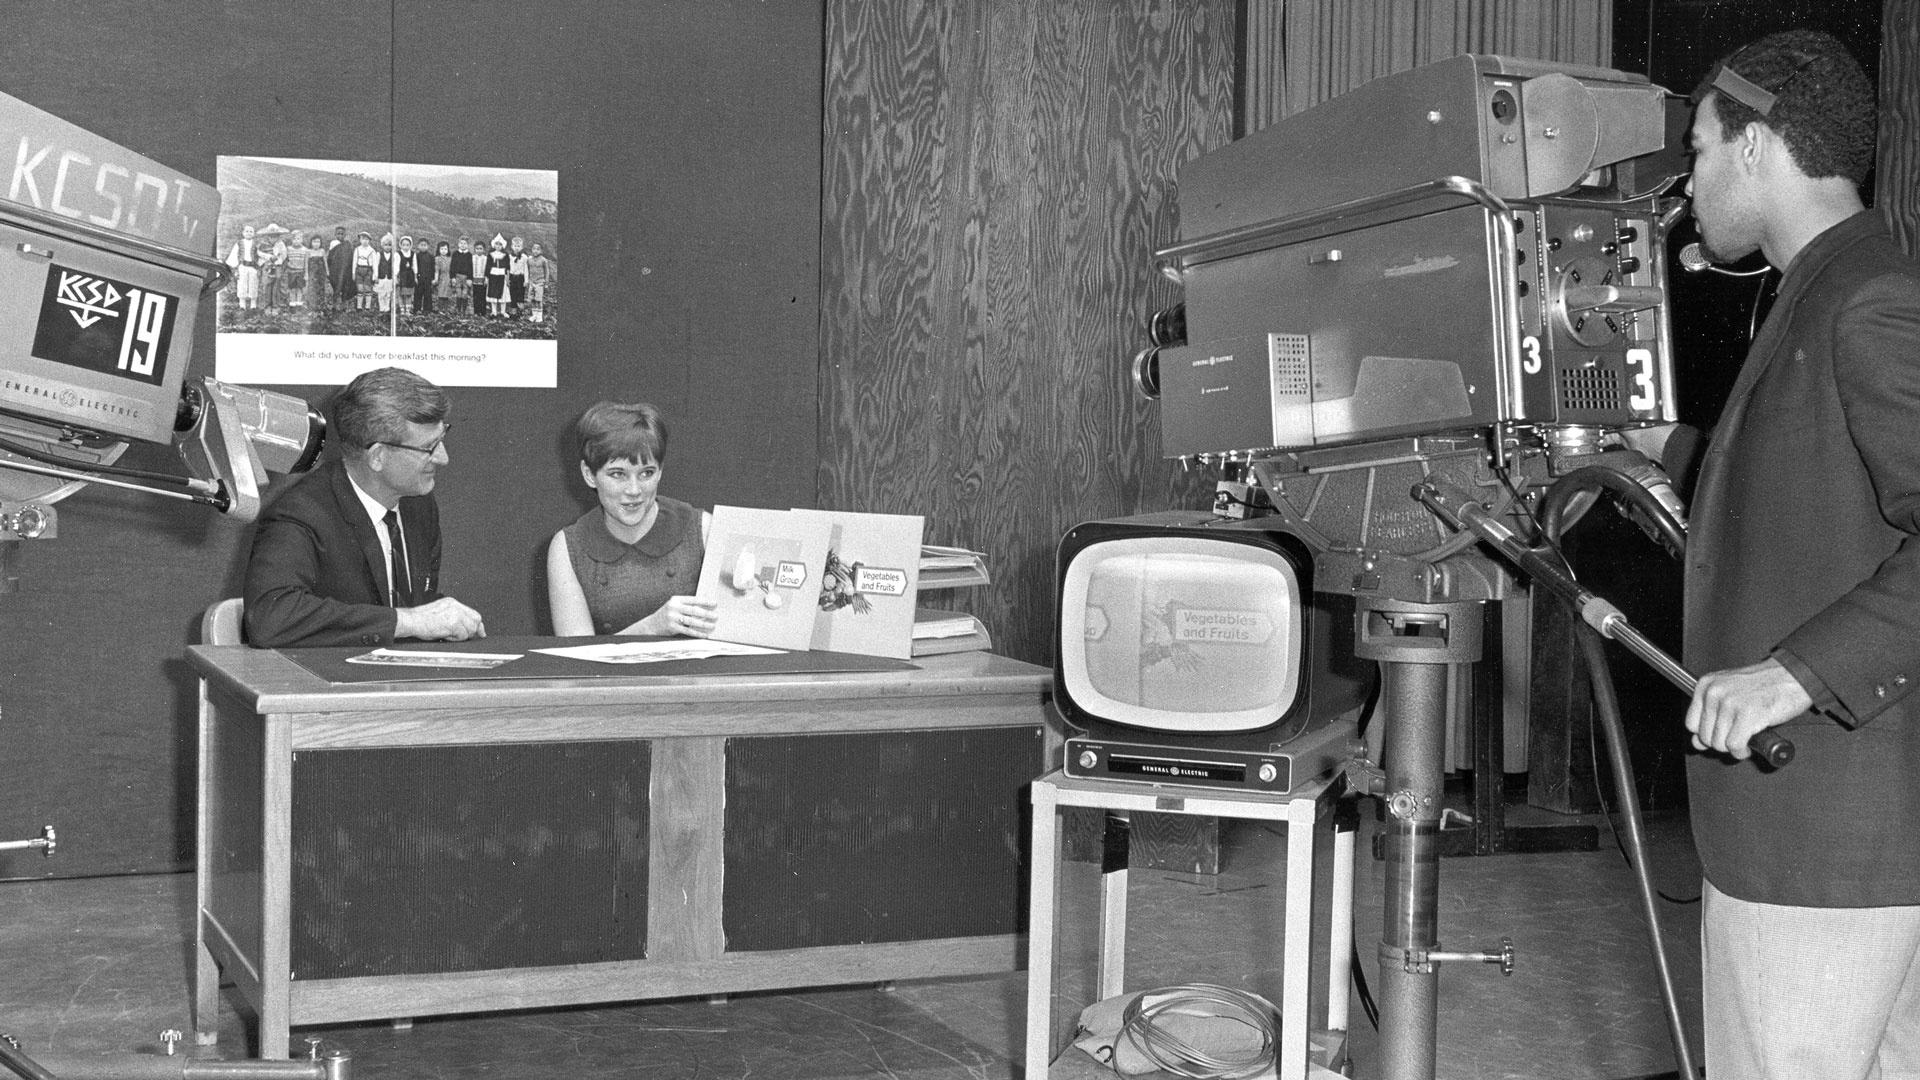 Man and woman with book and TV camera operator vintage photo